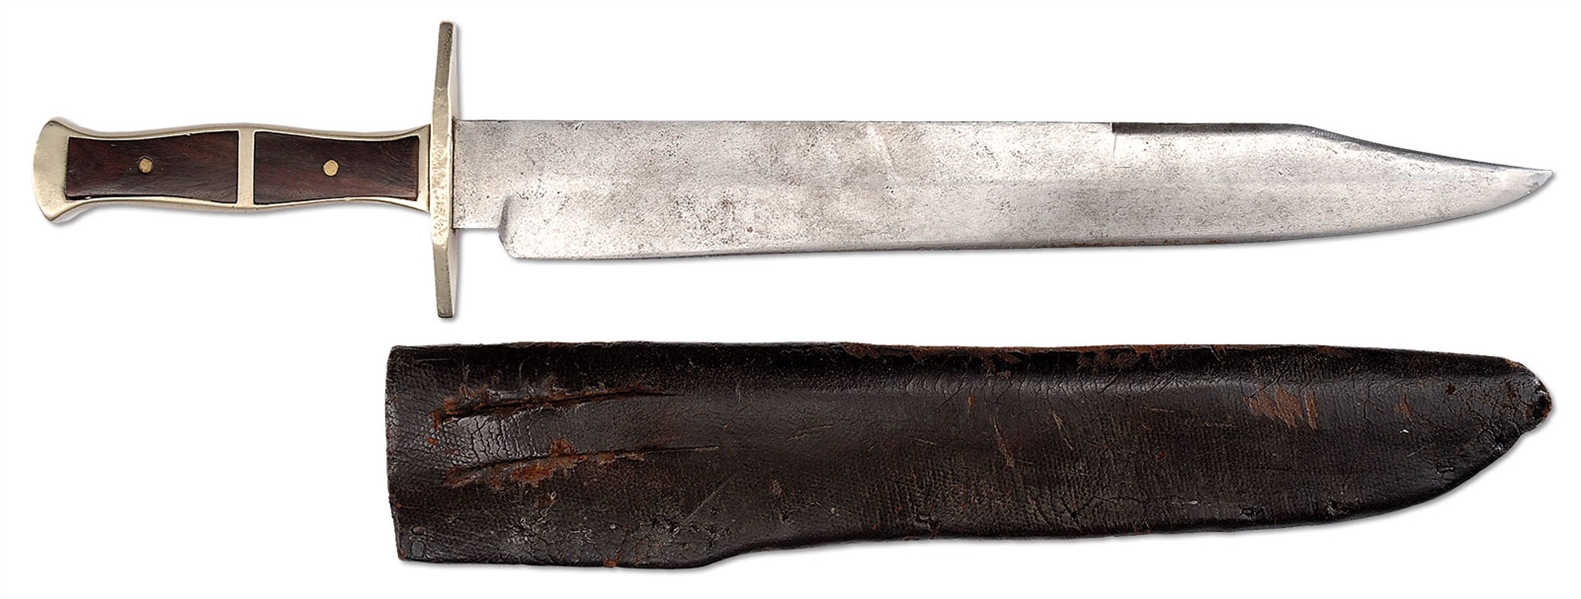 EXTREMELY RARE SAMUEL MILLWEE, KNOXVILLE, TENNESSEE MADE CONFEDERATE BOWIE KNIFE.                                                                                                                       